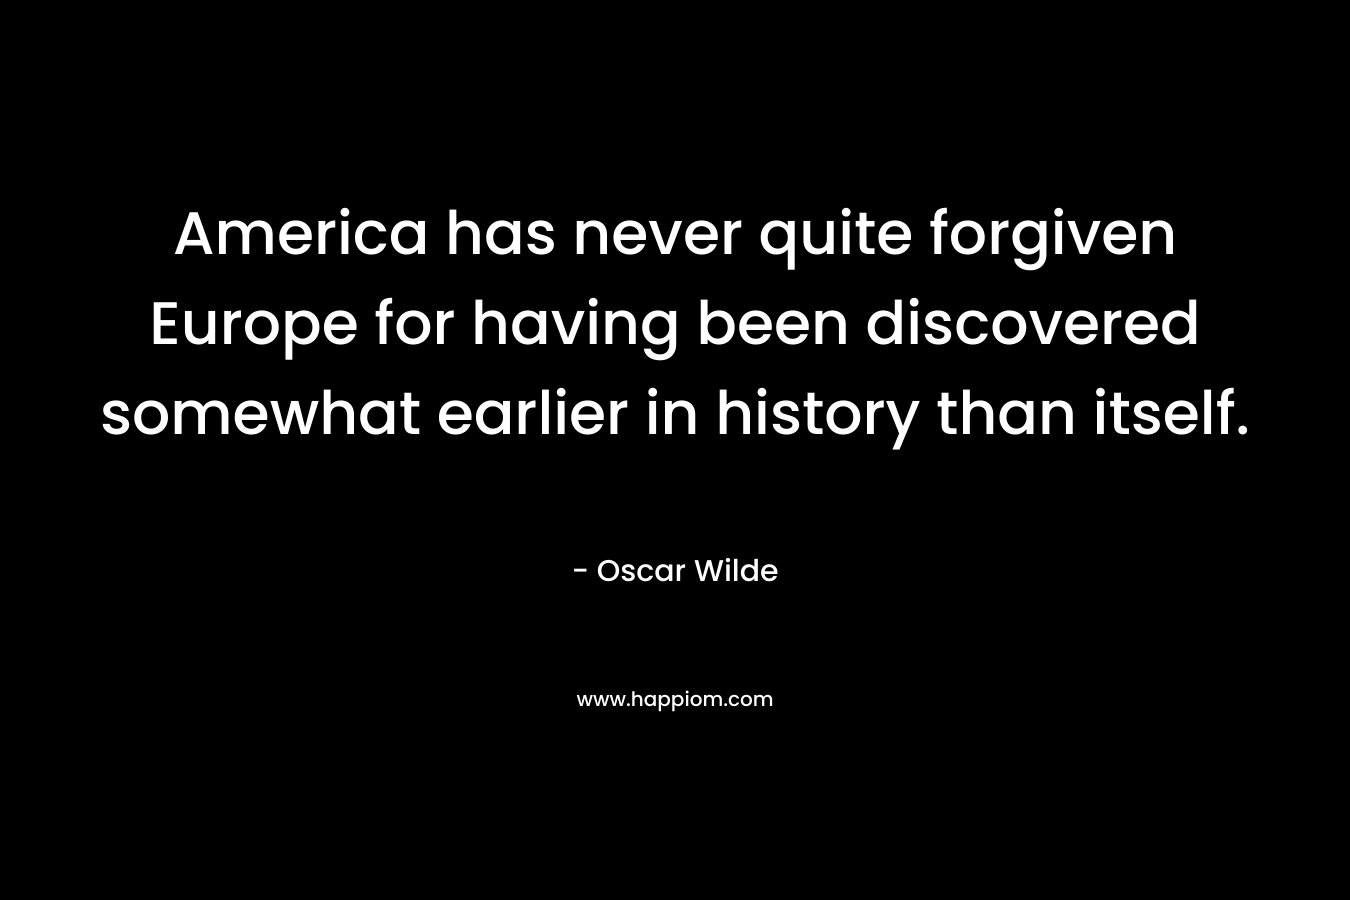 America has never quite forgiven Europe for having been discovered somewhat earlier in history than itself.